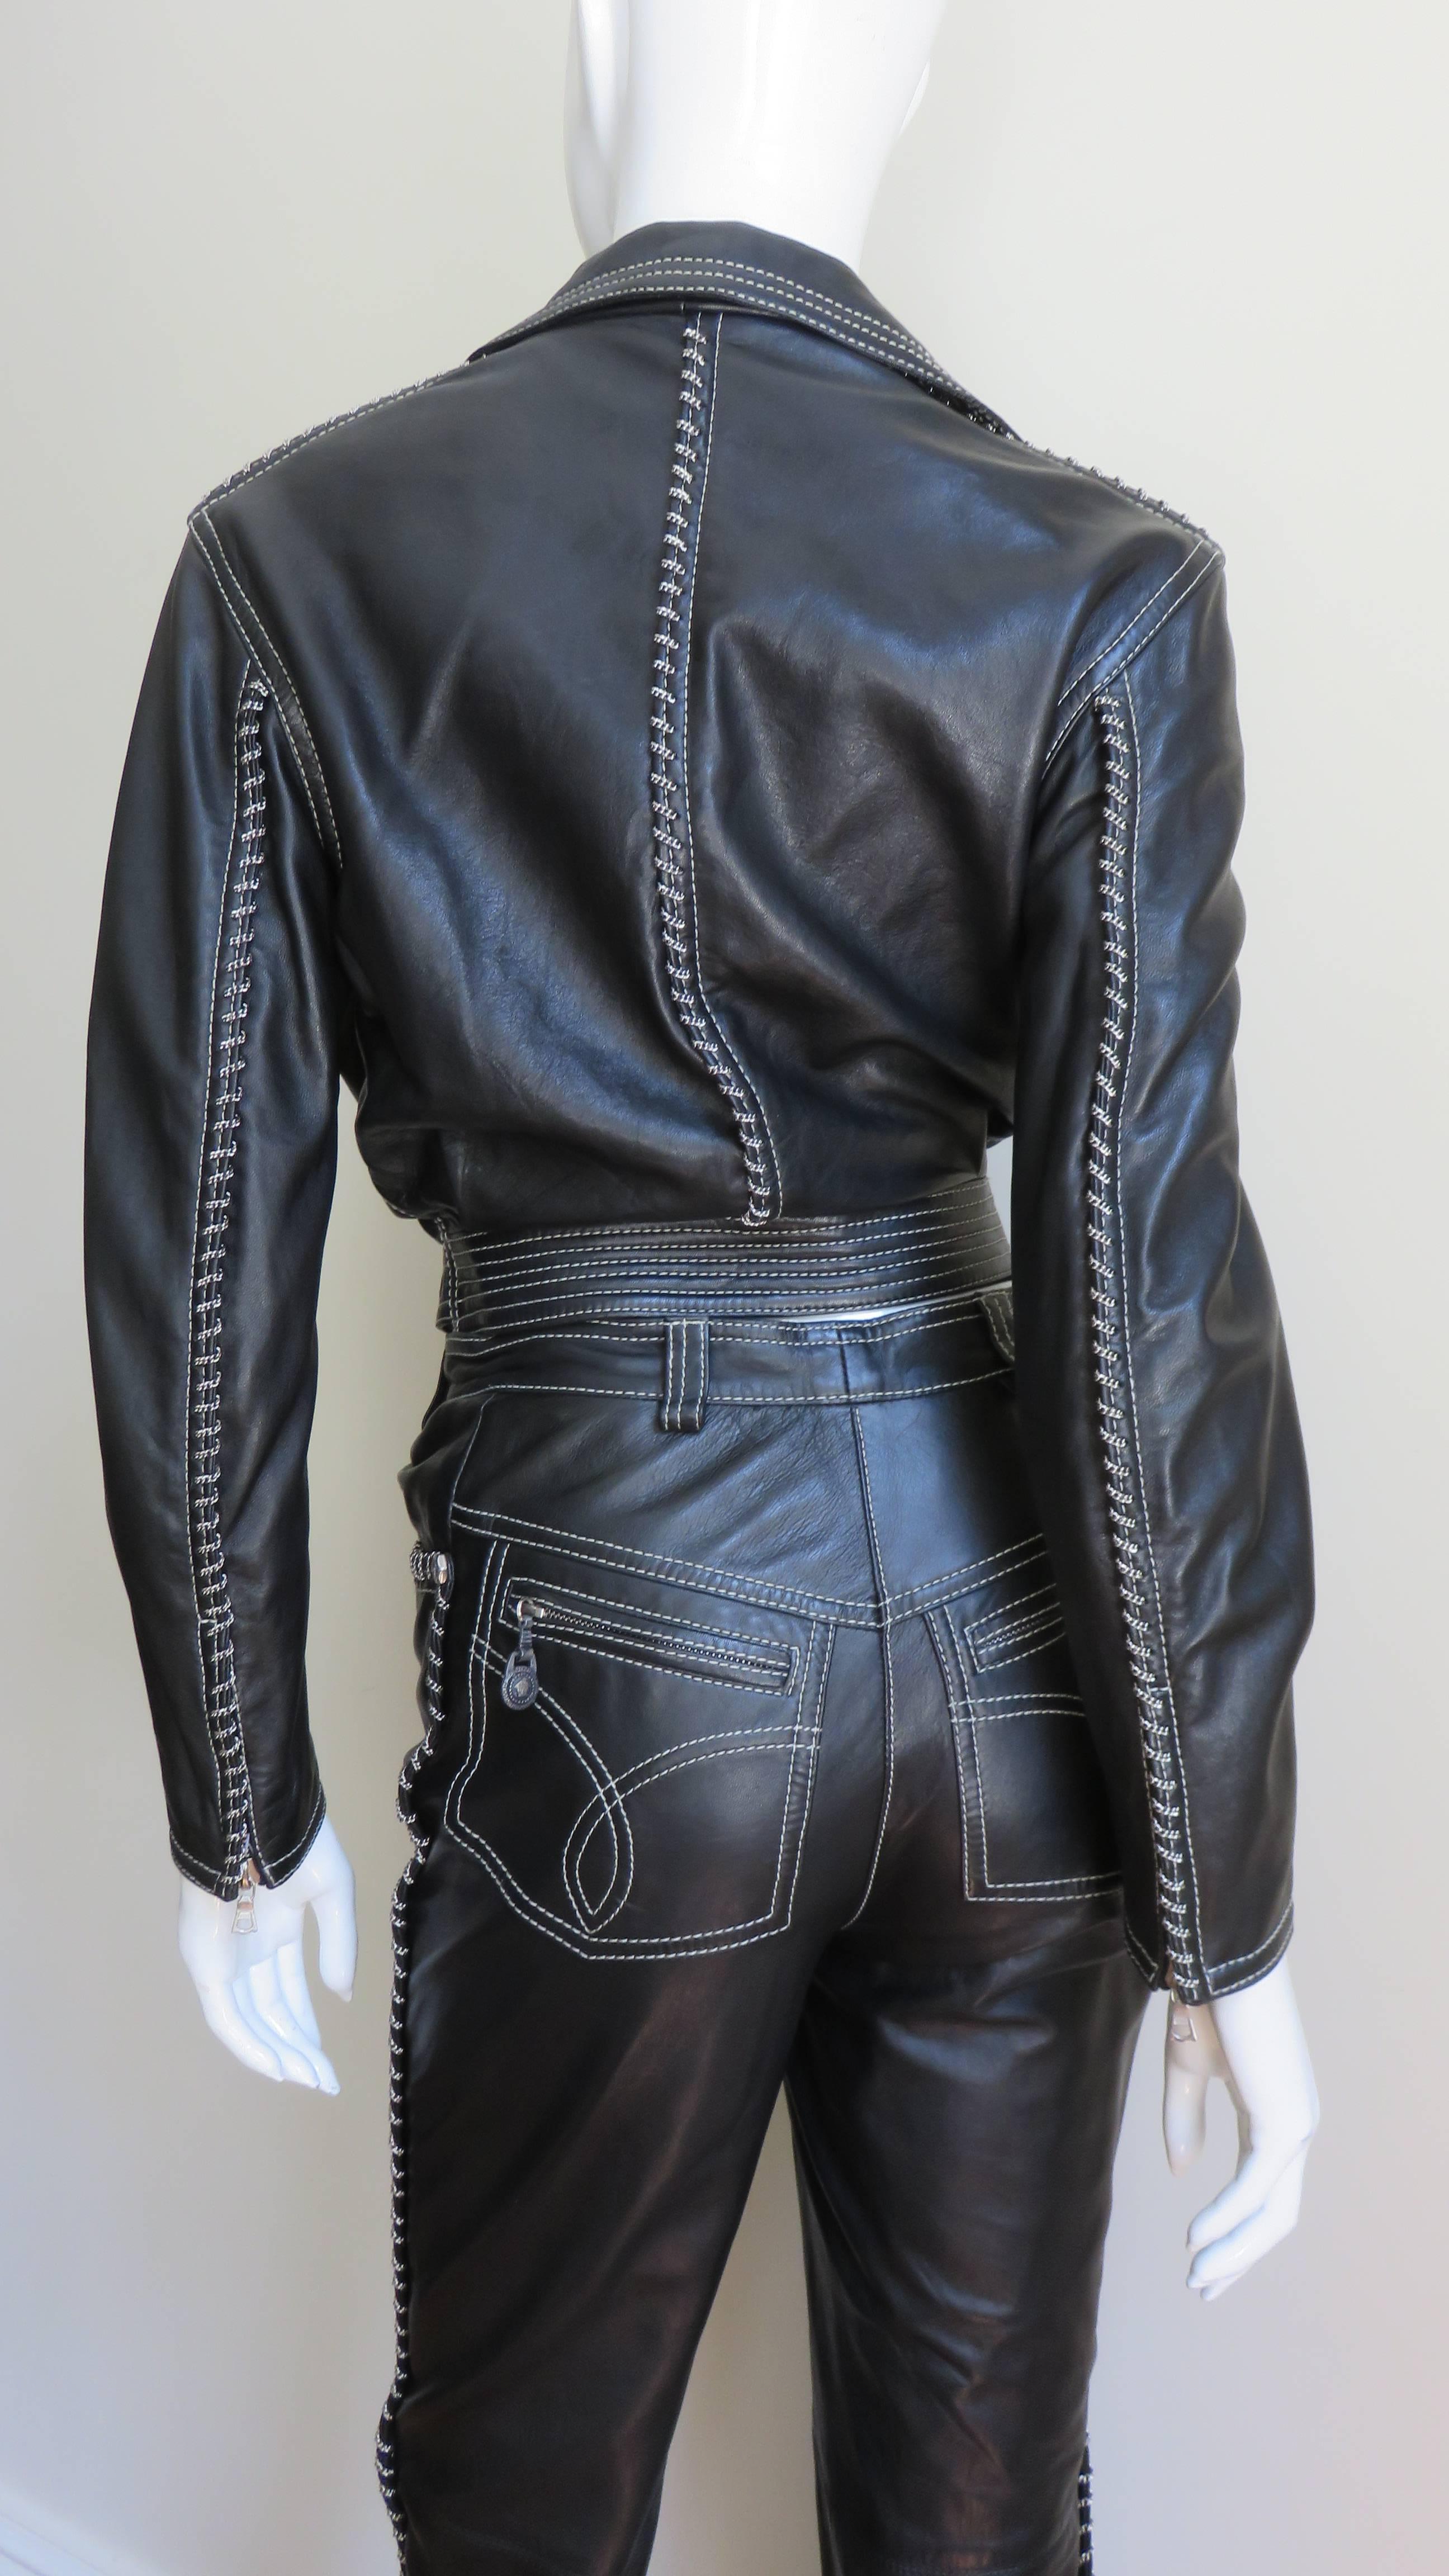  Gianni Versace A/W 1992 Leather Motorcycle Jacket and Pants With Chain Trim  For Sale 7